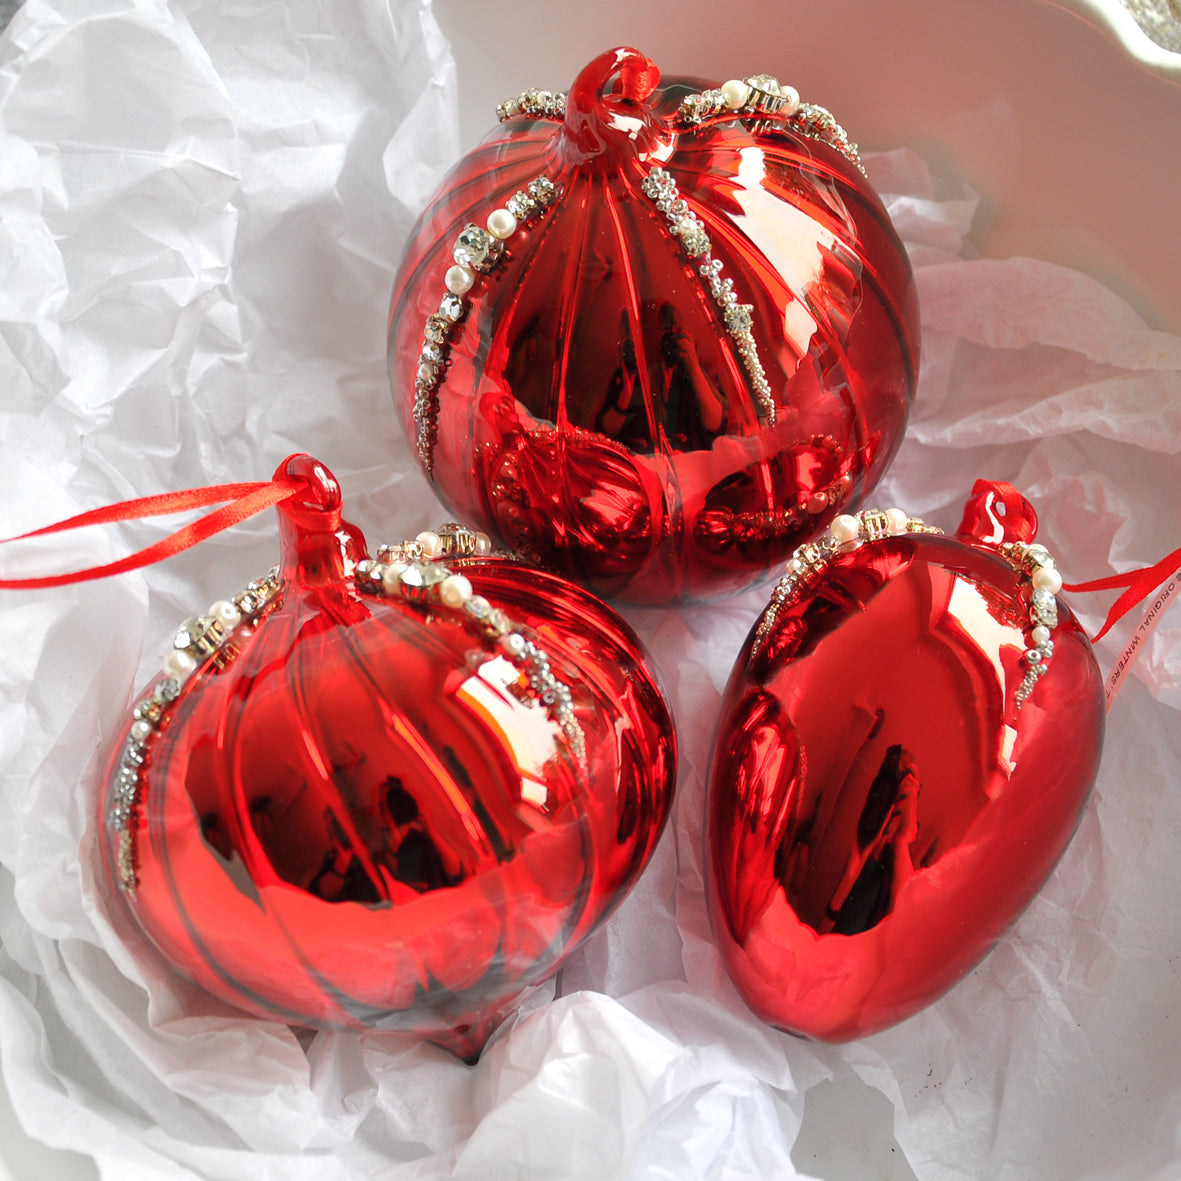 This red mirror egg shape Christmas ornament is made from glass and decorated with beads, pearls and diamonte.